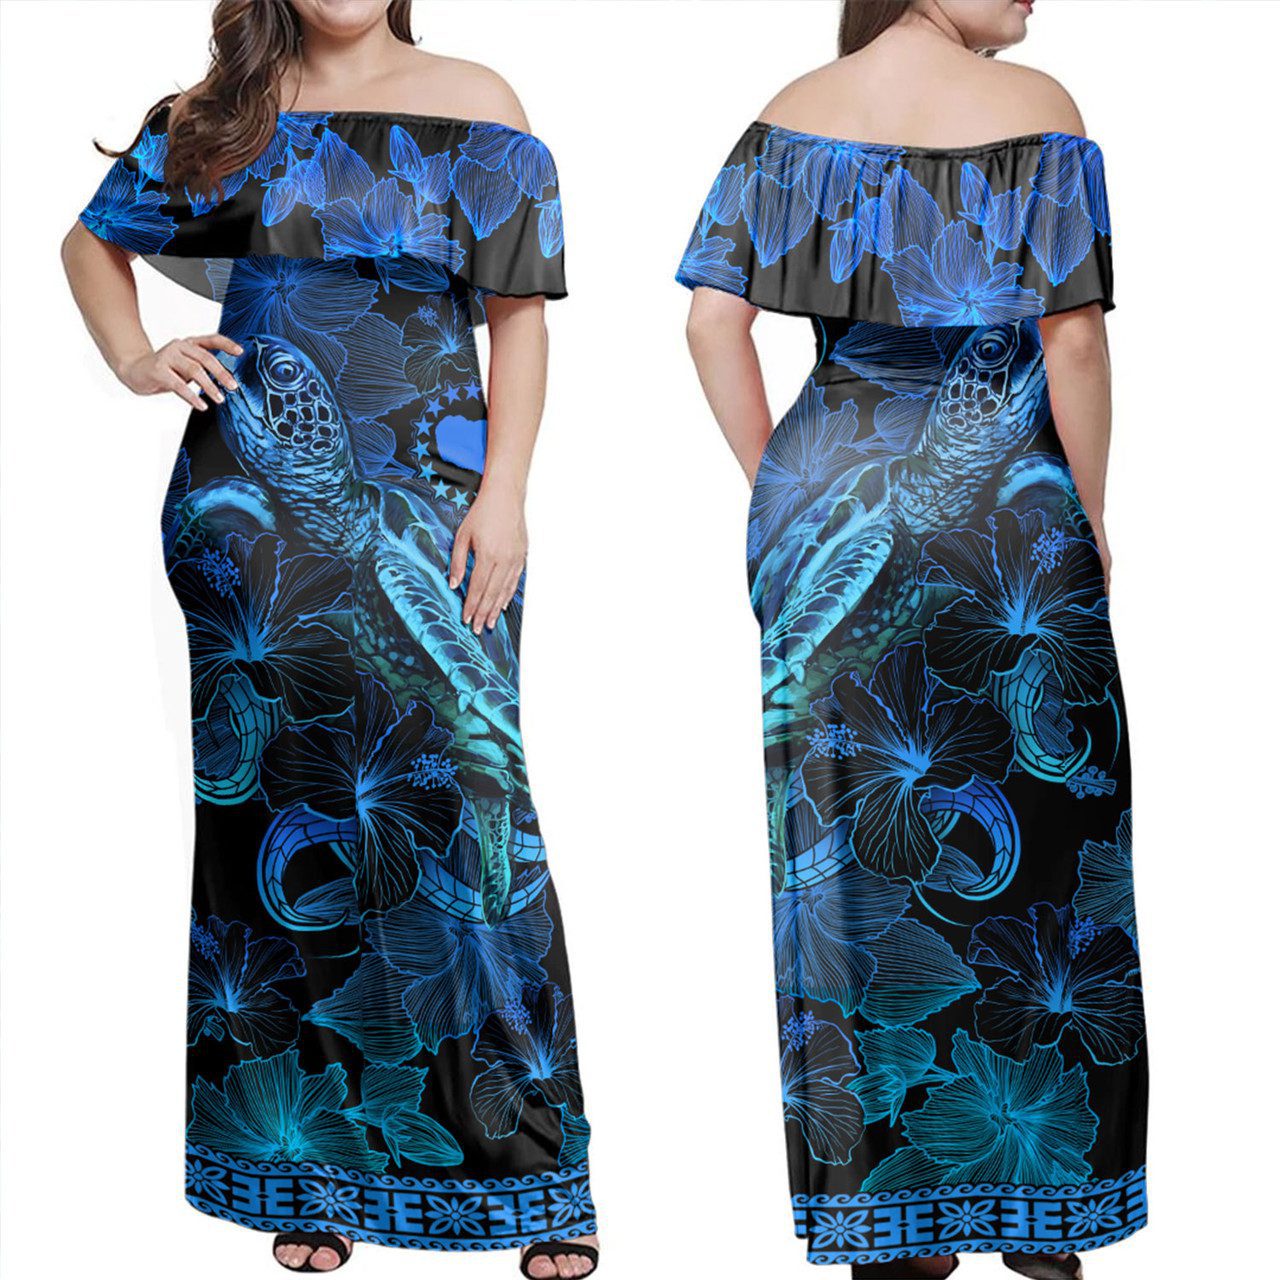 Cook Islands Off Shoulder Long Dress Sea Turtle With Blooming Hibiscus Flowers Tribal Blue